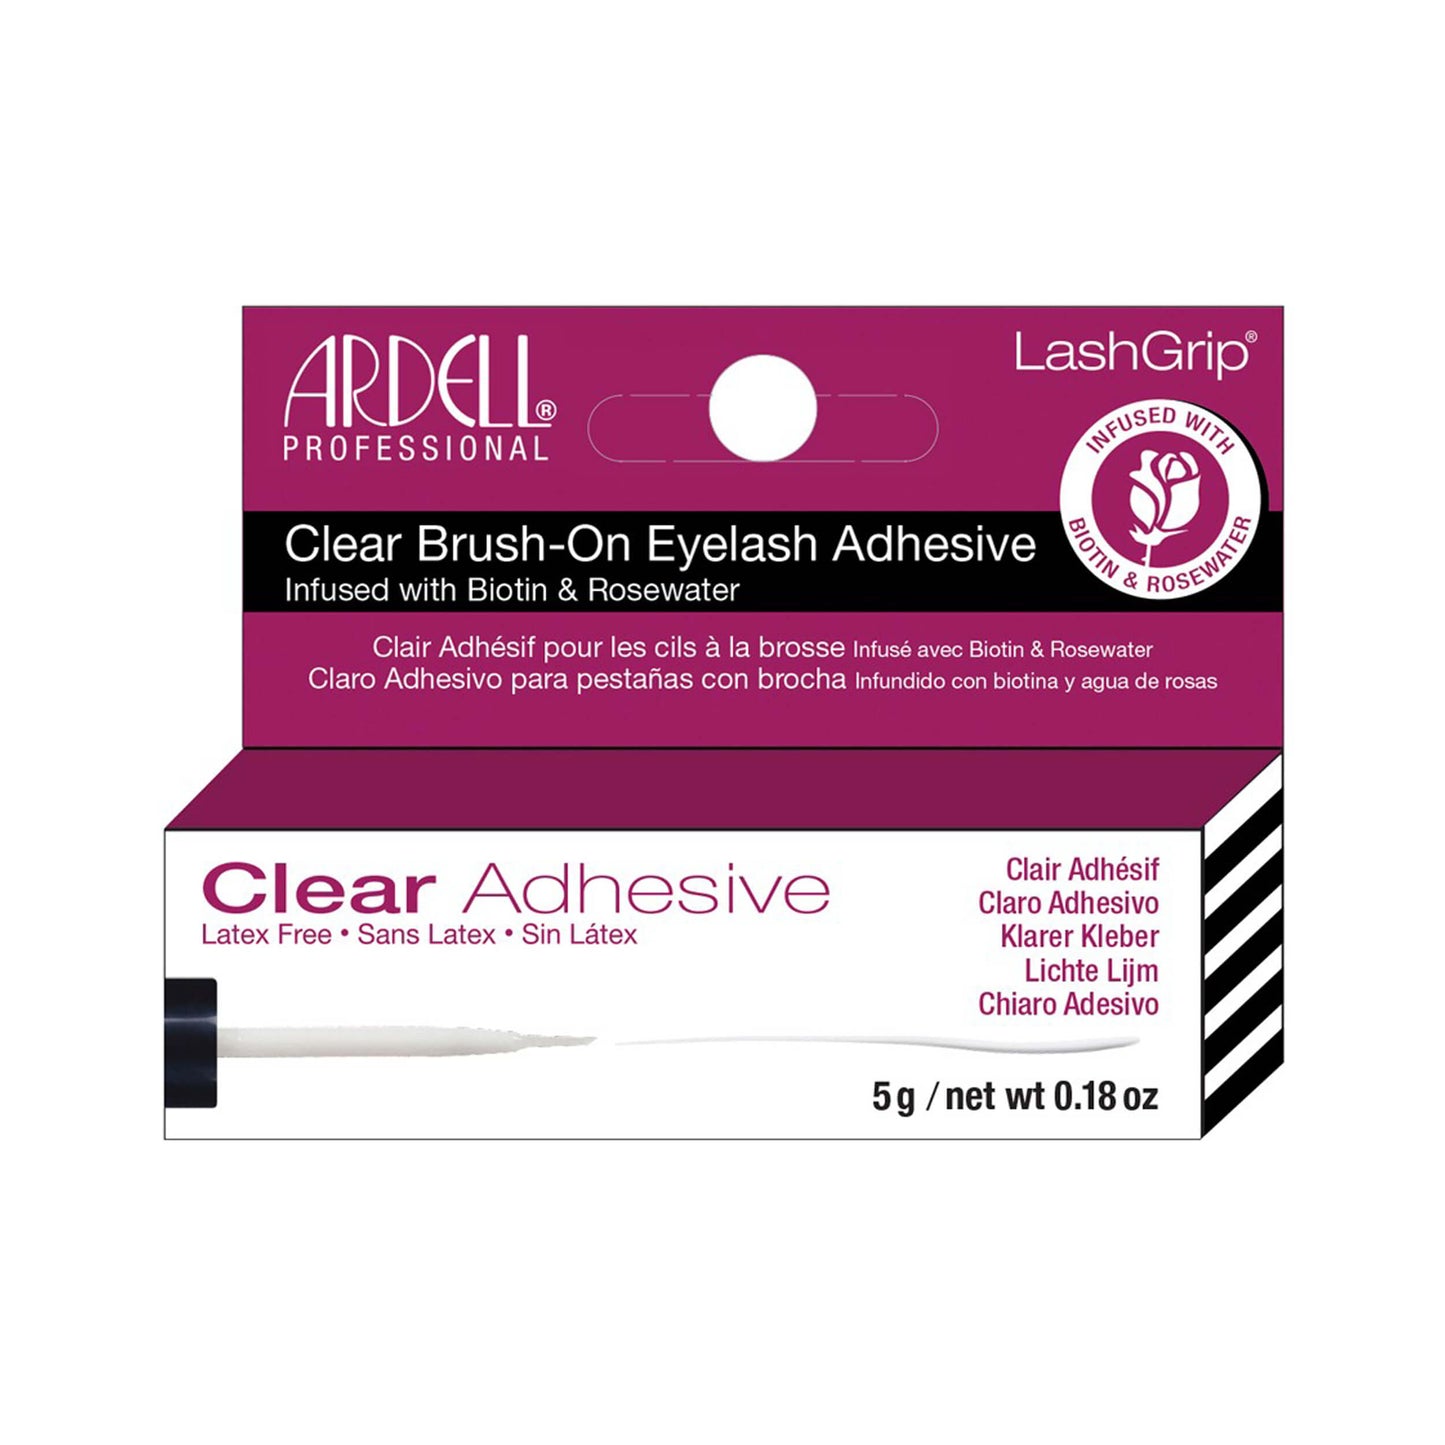 Ardell Brush-On Adhesive with Biotin Rosewater Clear 5 g